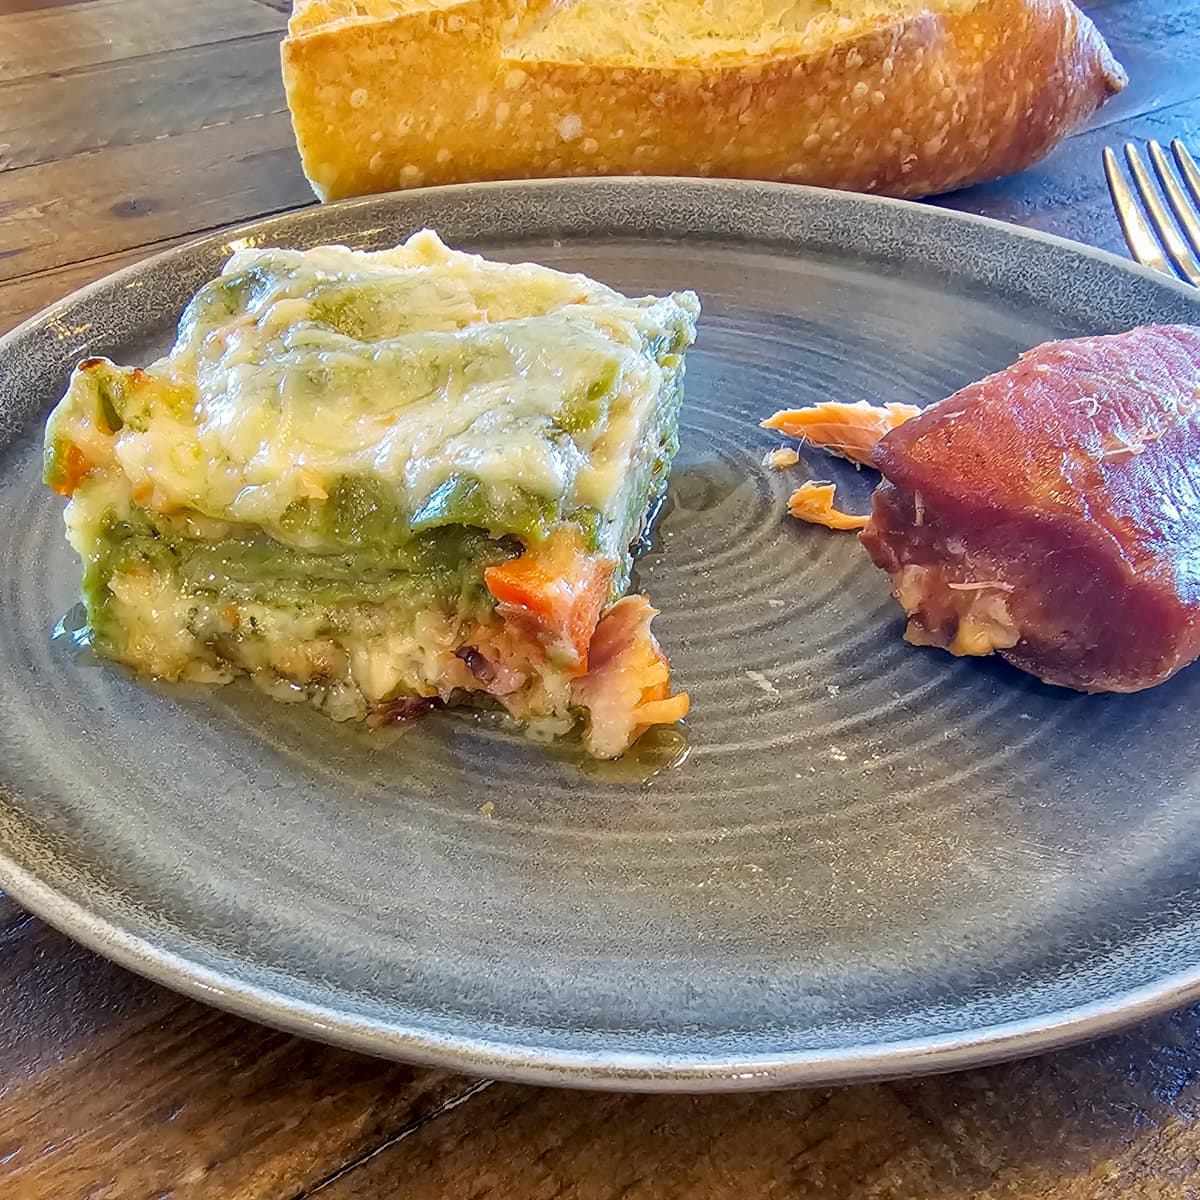 Seafood lasagna with smoked salmon, spinach noodles and parmesan bechamel sauce.